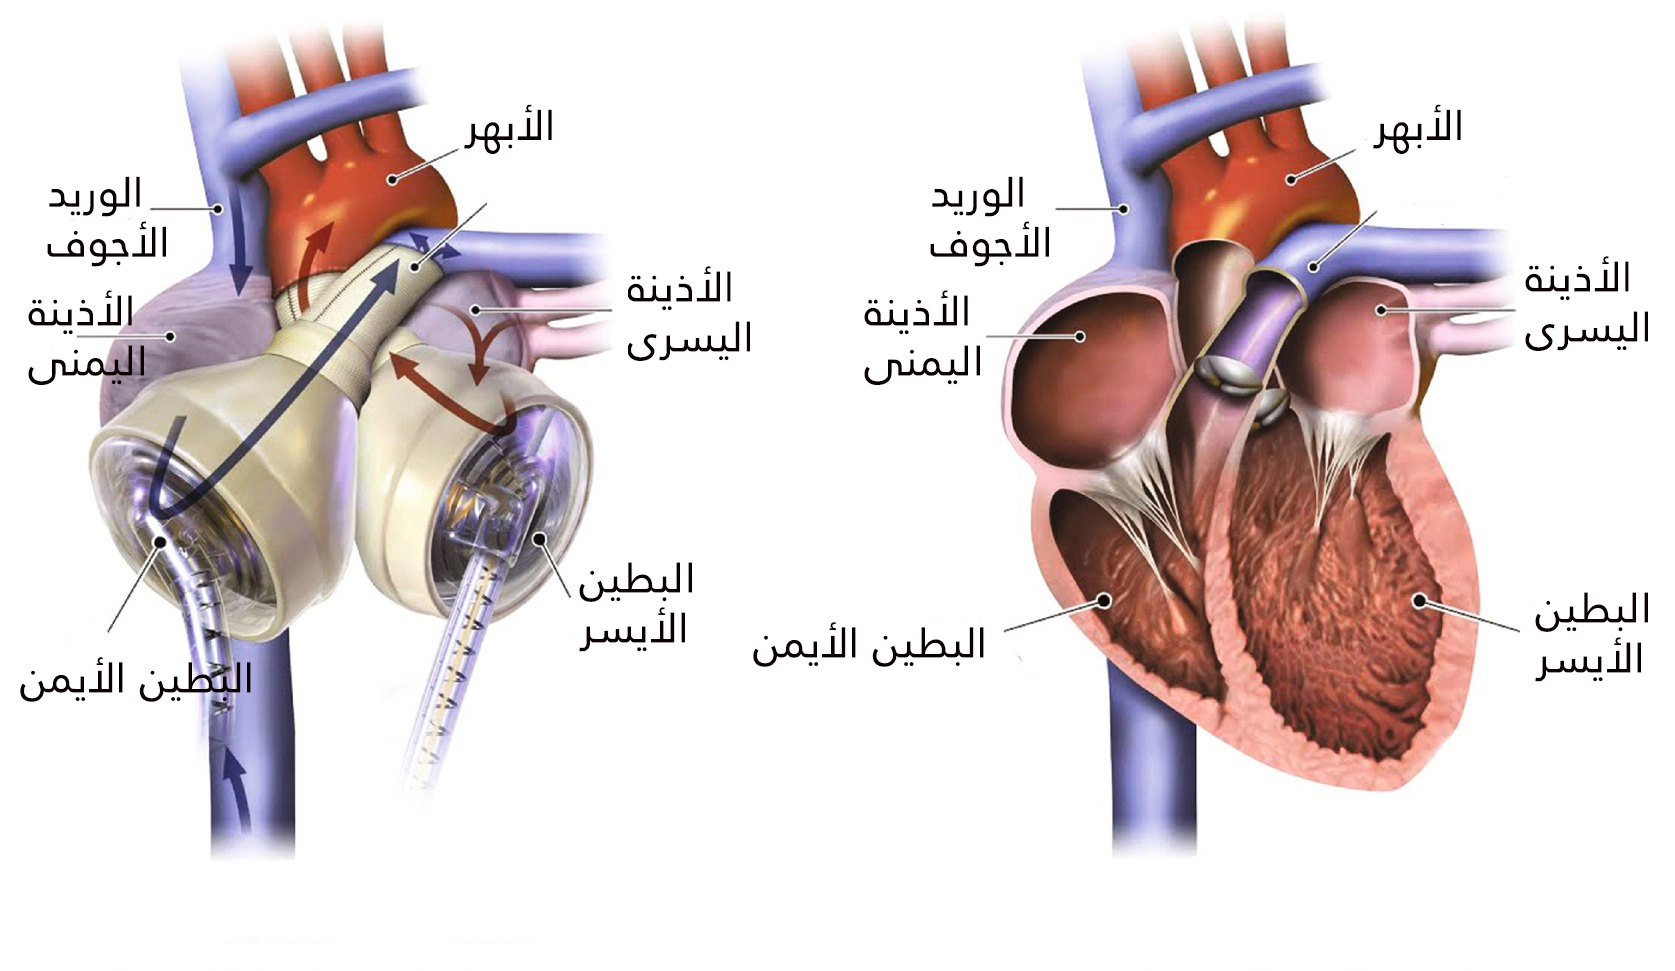 The artificial heart contains two chambers, opposite the right and left ventricles